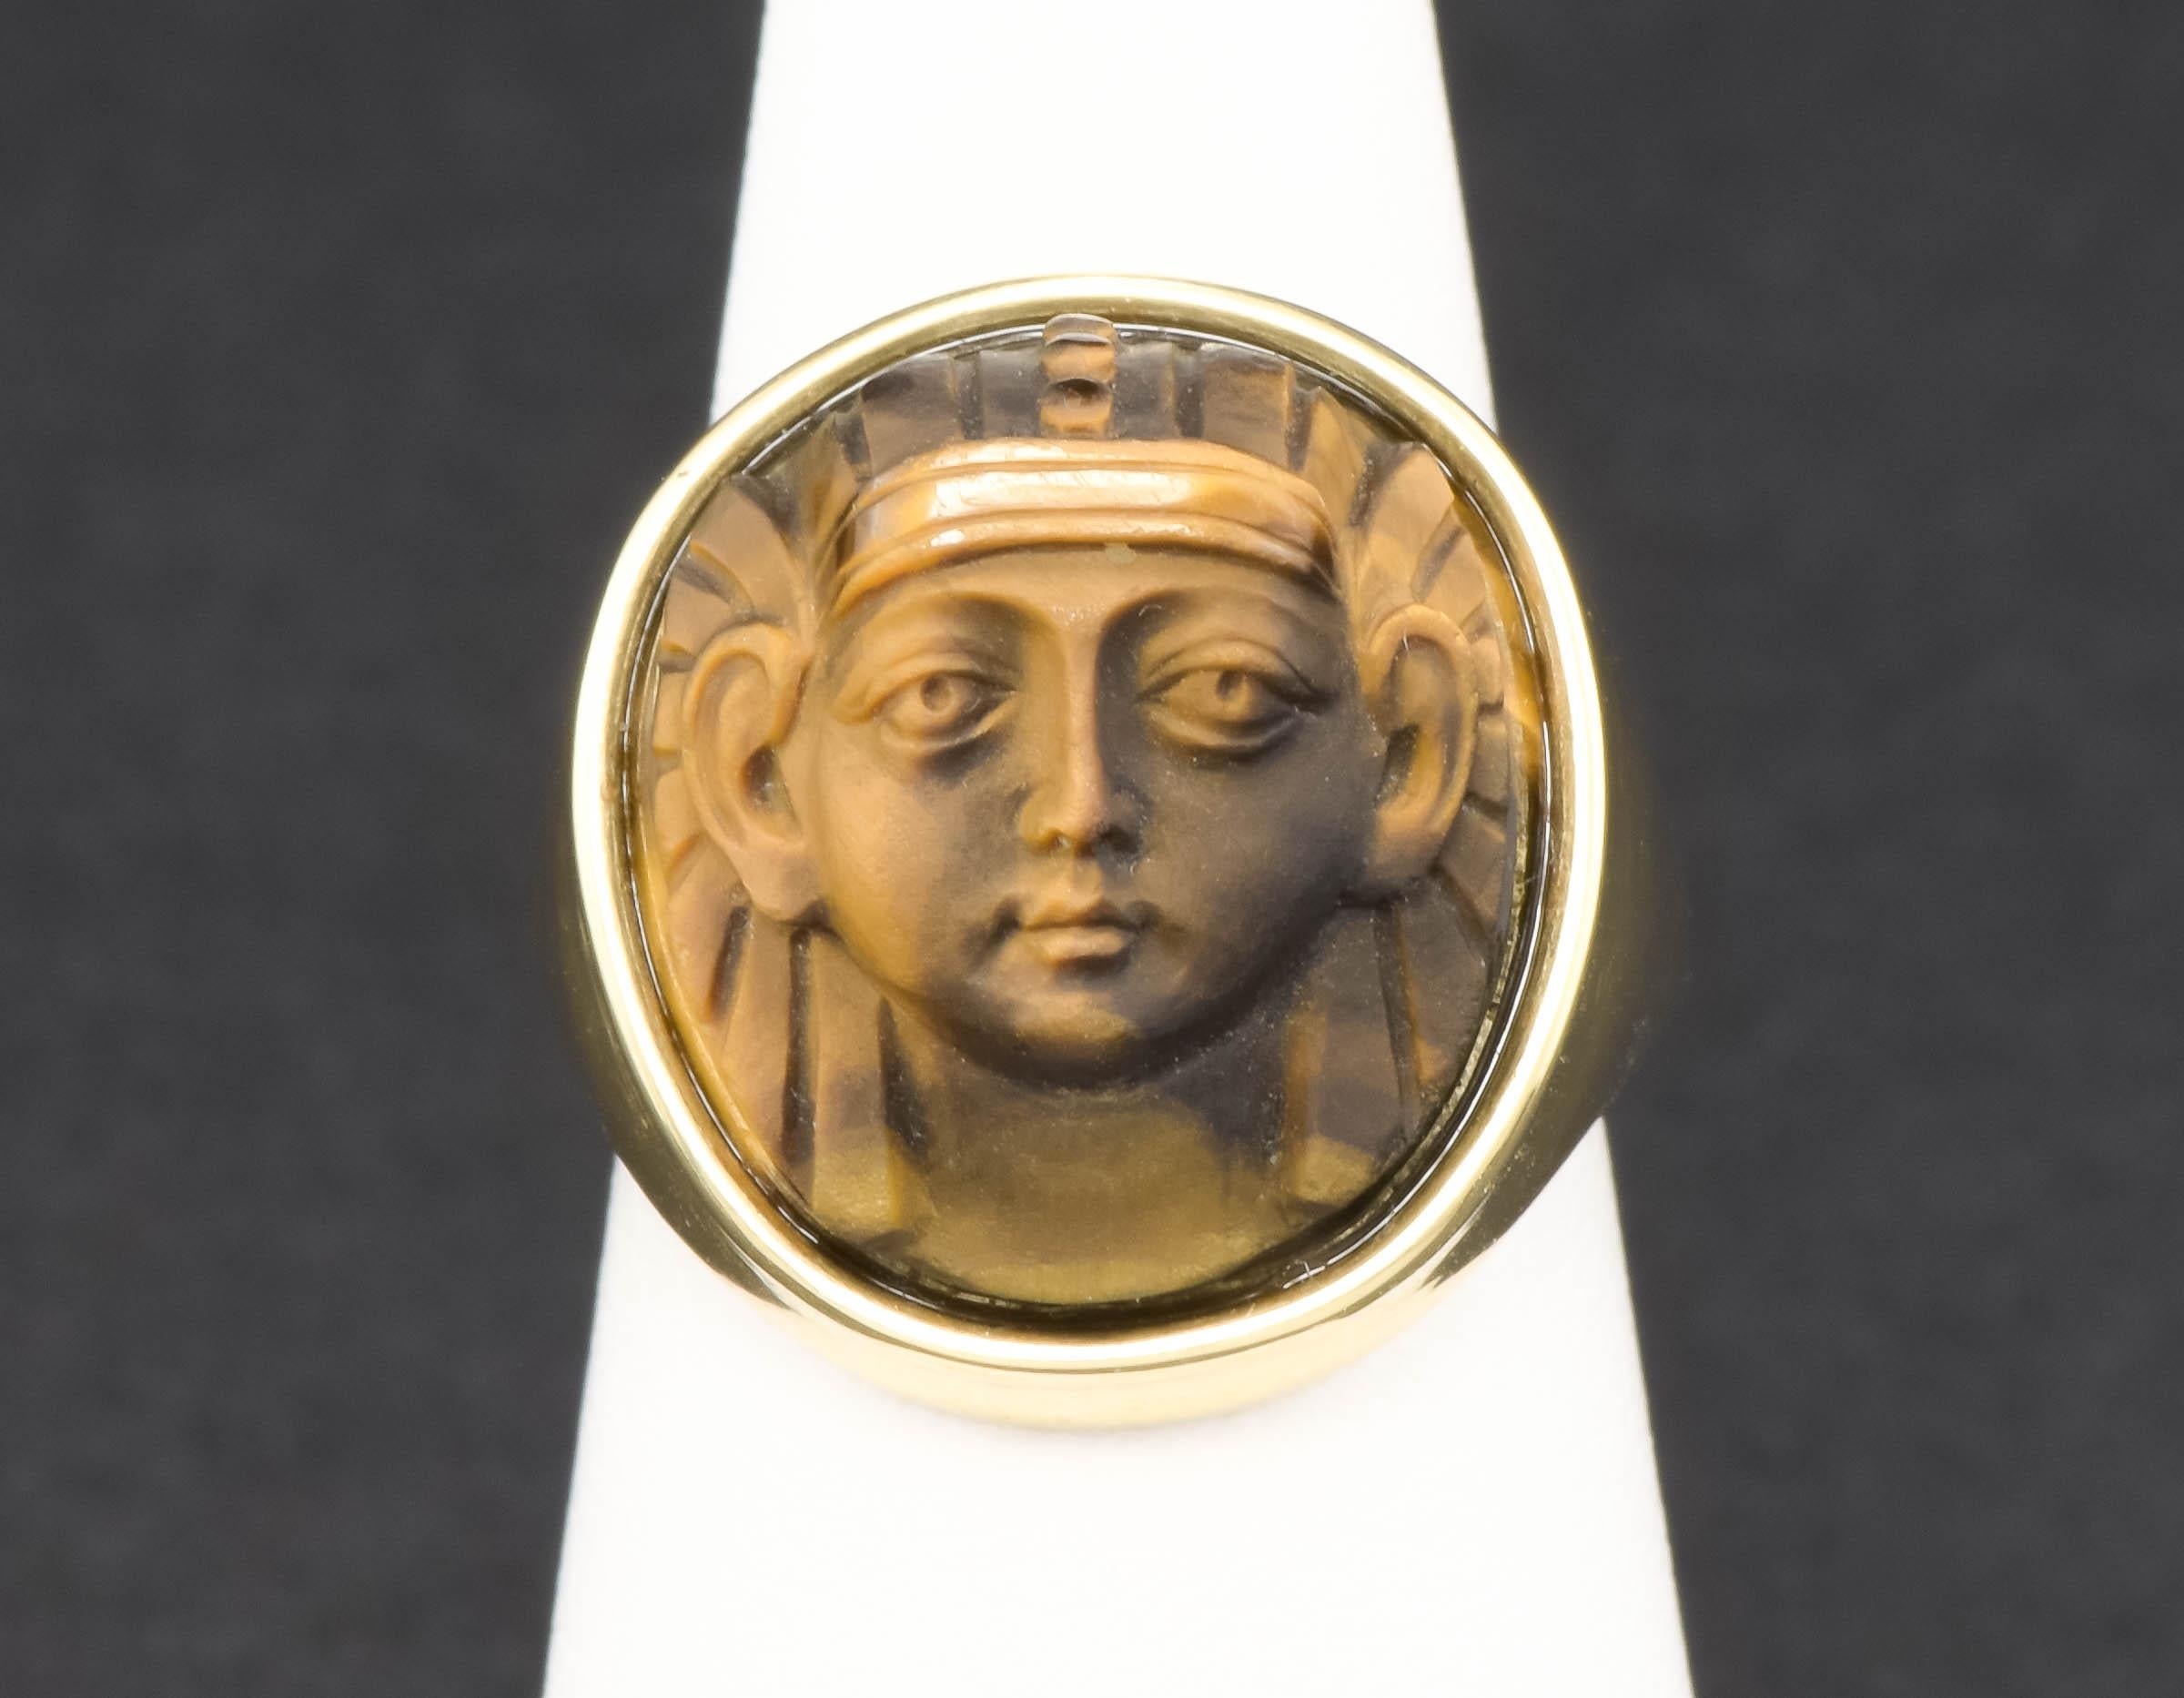 One of my all time favorite antique conversion pieces - this substantial and very striking gold signet ring uses part of a beautifully carved antique tiger's eye stick pin. King Tut's tomb was discovered in 1922, so I suspect the carved portrait